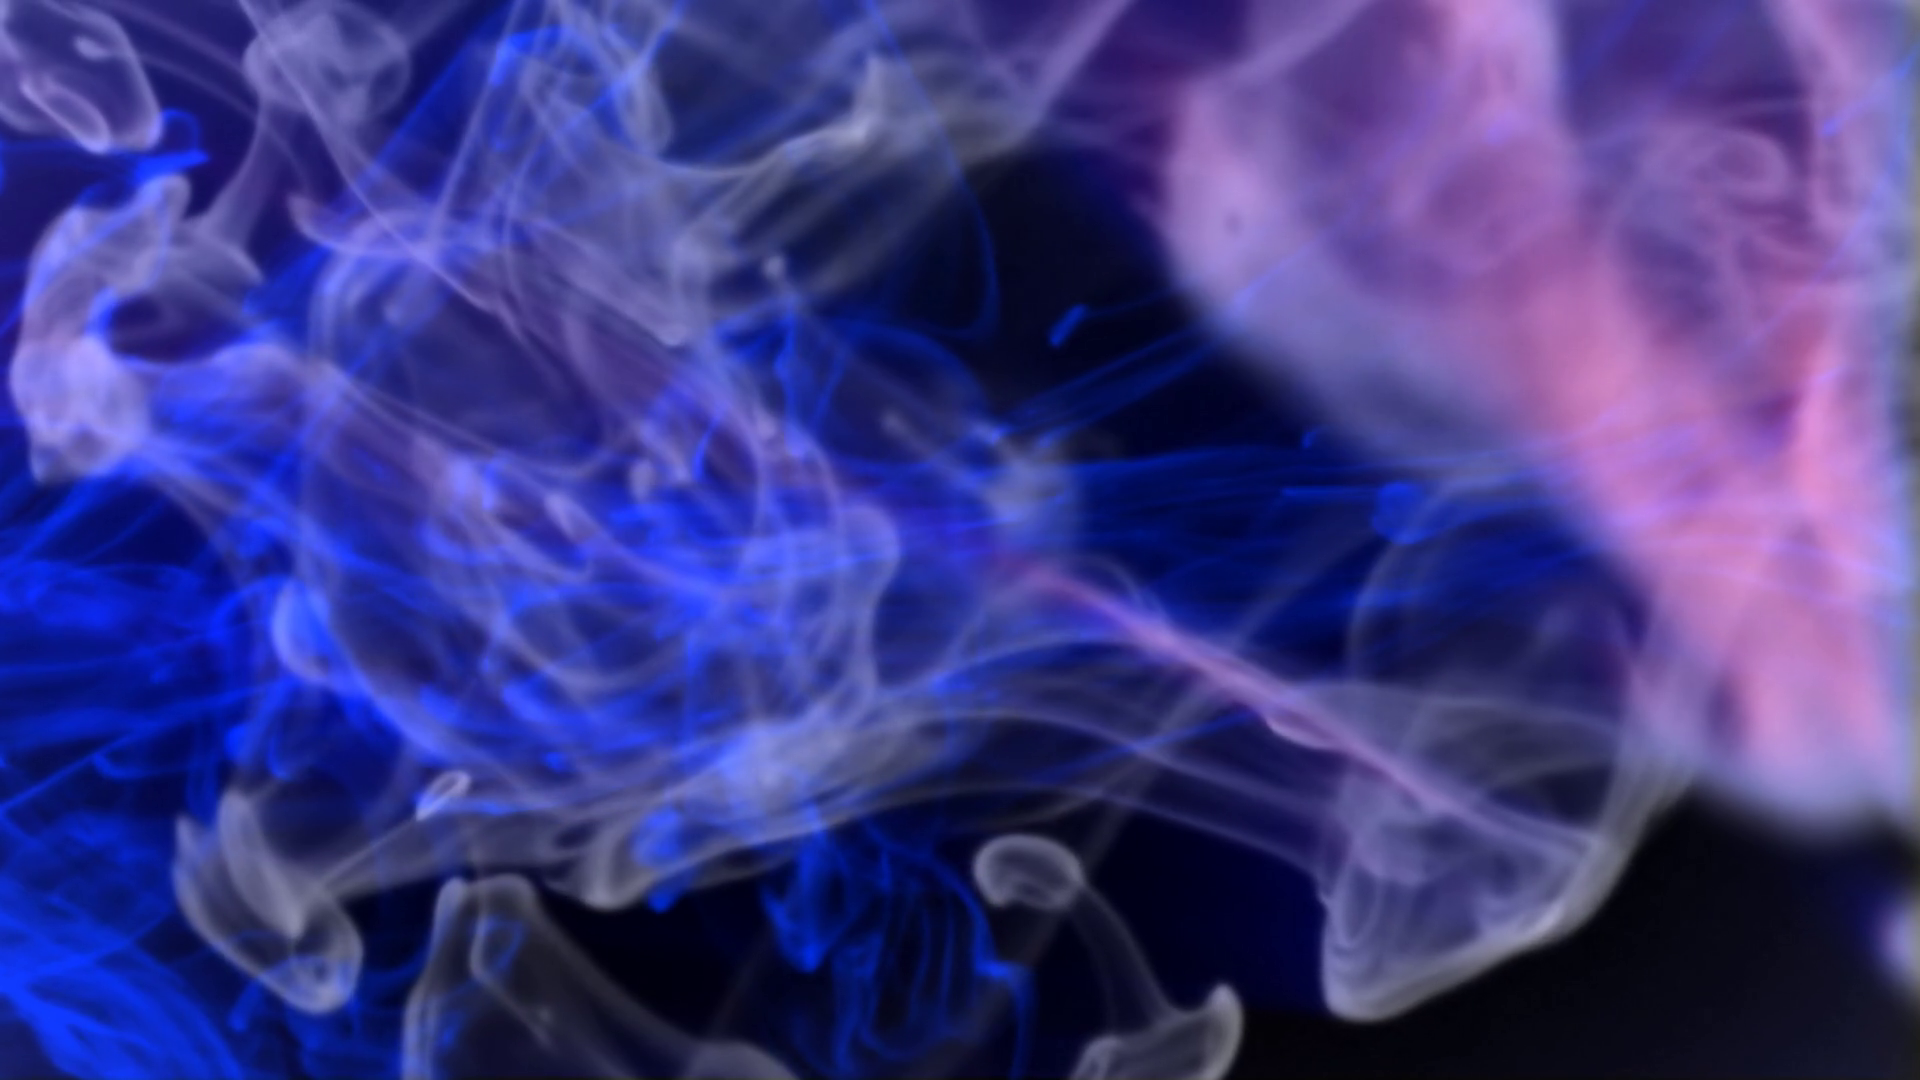 Abstract Smoke Blue and White Motion Background - Videoblocks